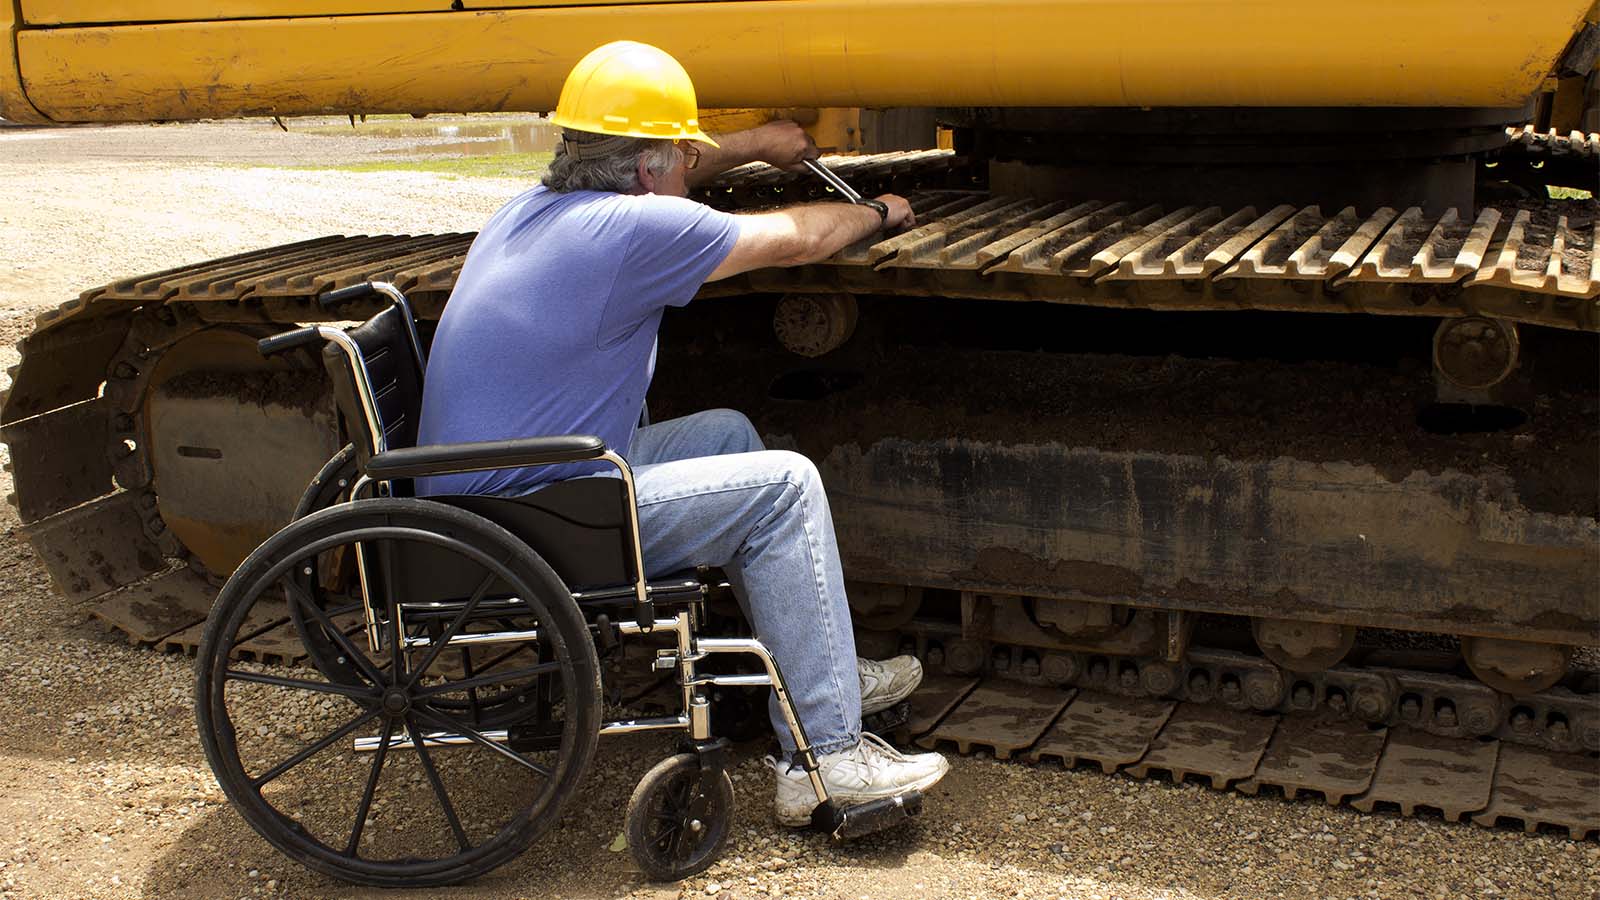 Integrating people with disabilities in the workplace. Illustration. (Credit: Shutterstock)